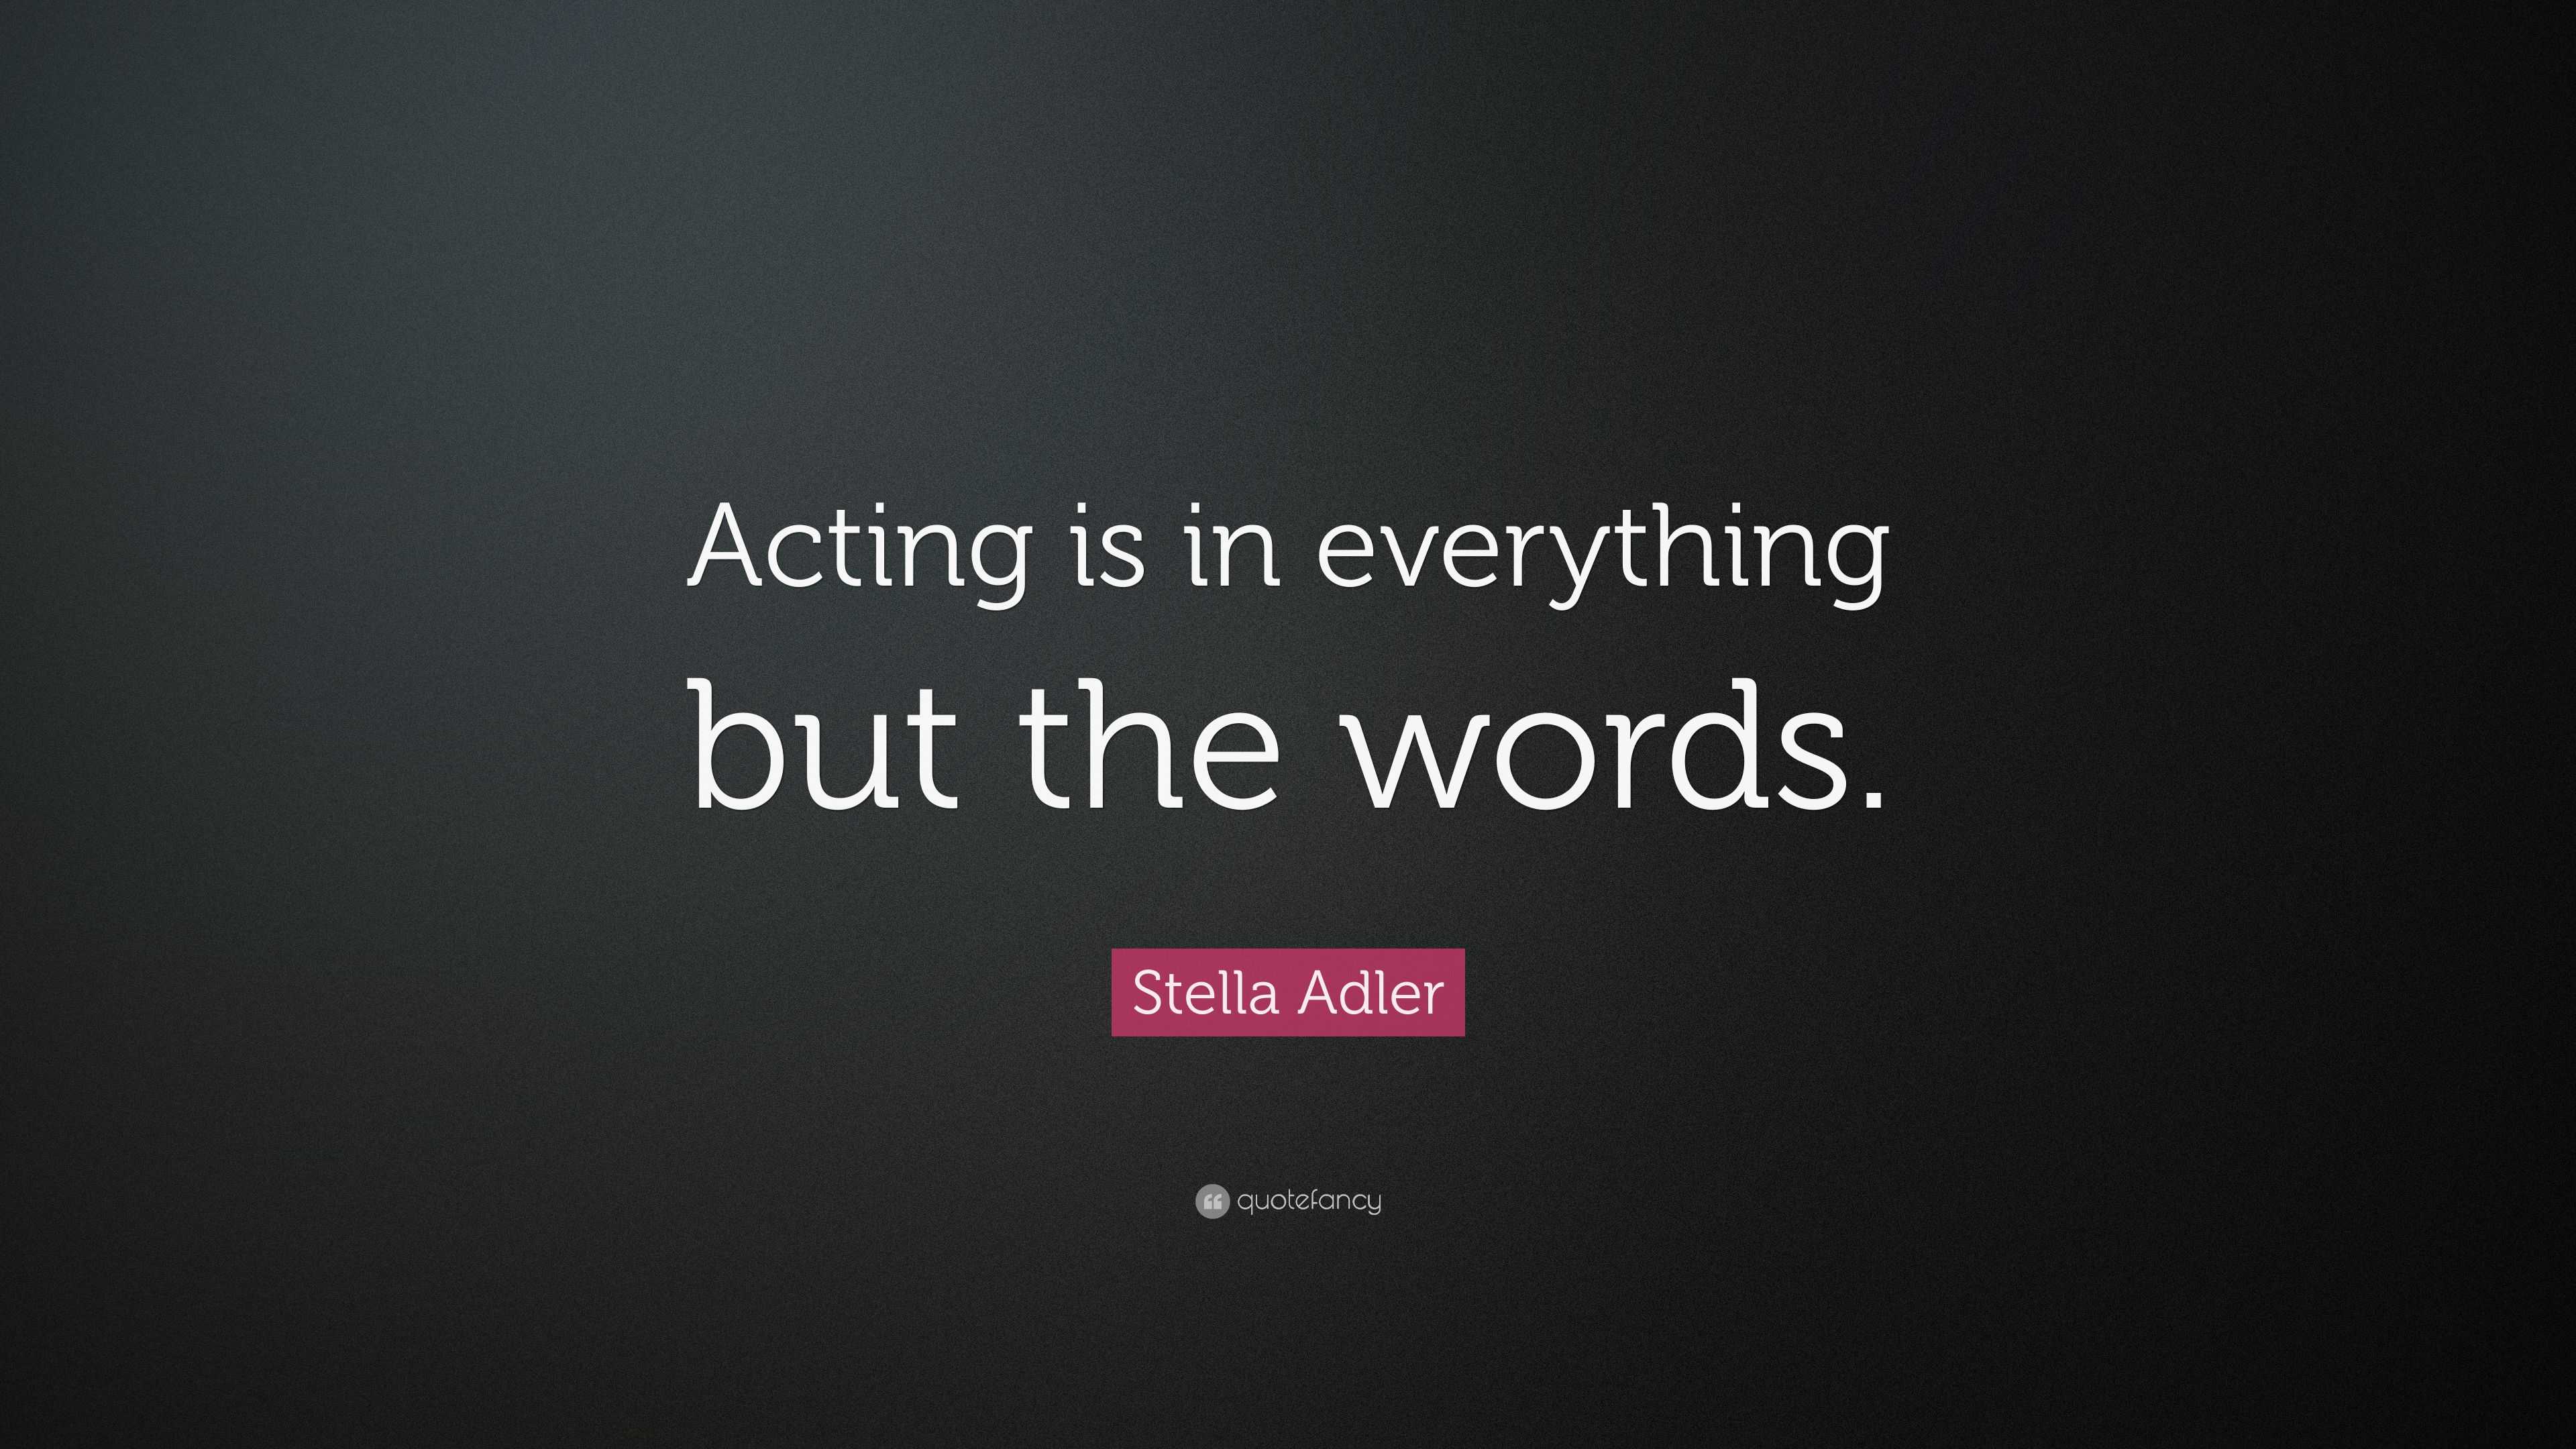 Stella Adler Quote: "Acting is in everything but the words." (12 wallpapers) - Quotefancy